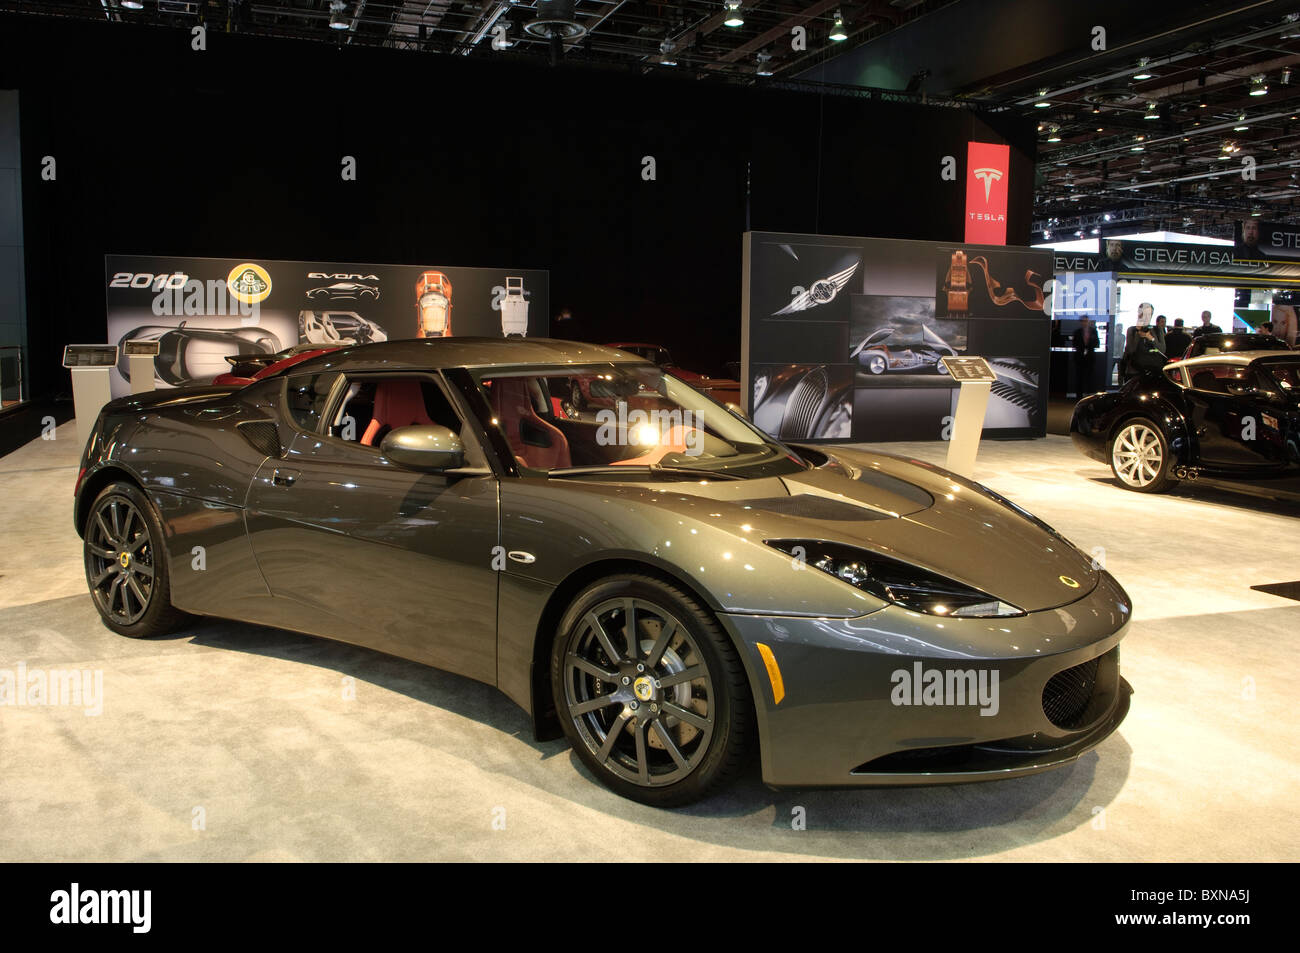 Lotus Evora at the 2010 North American International Auto Show in Detroit Stock Photo